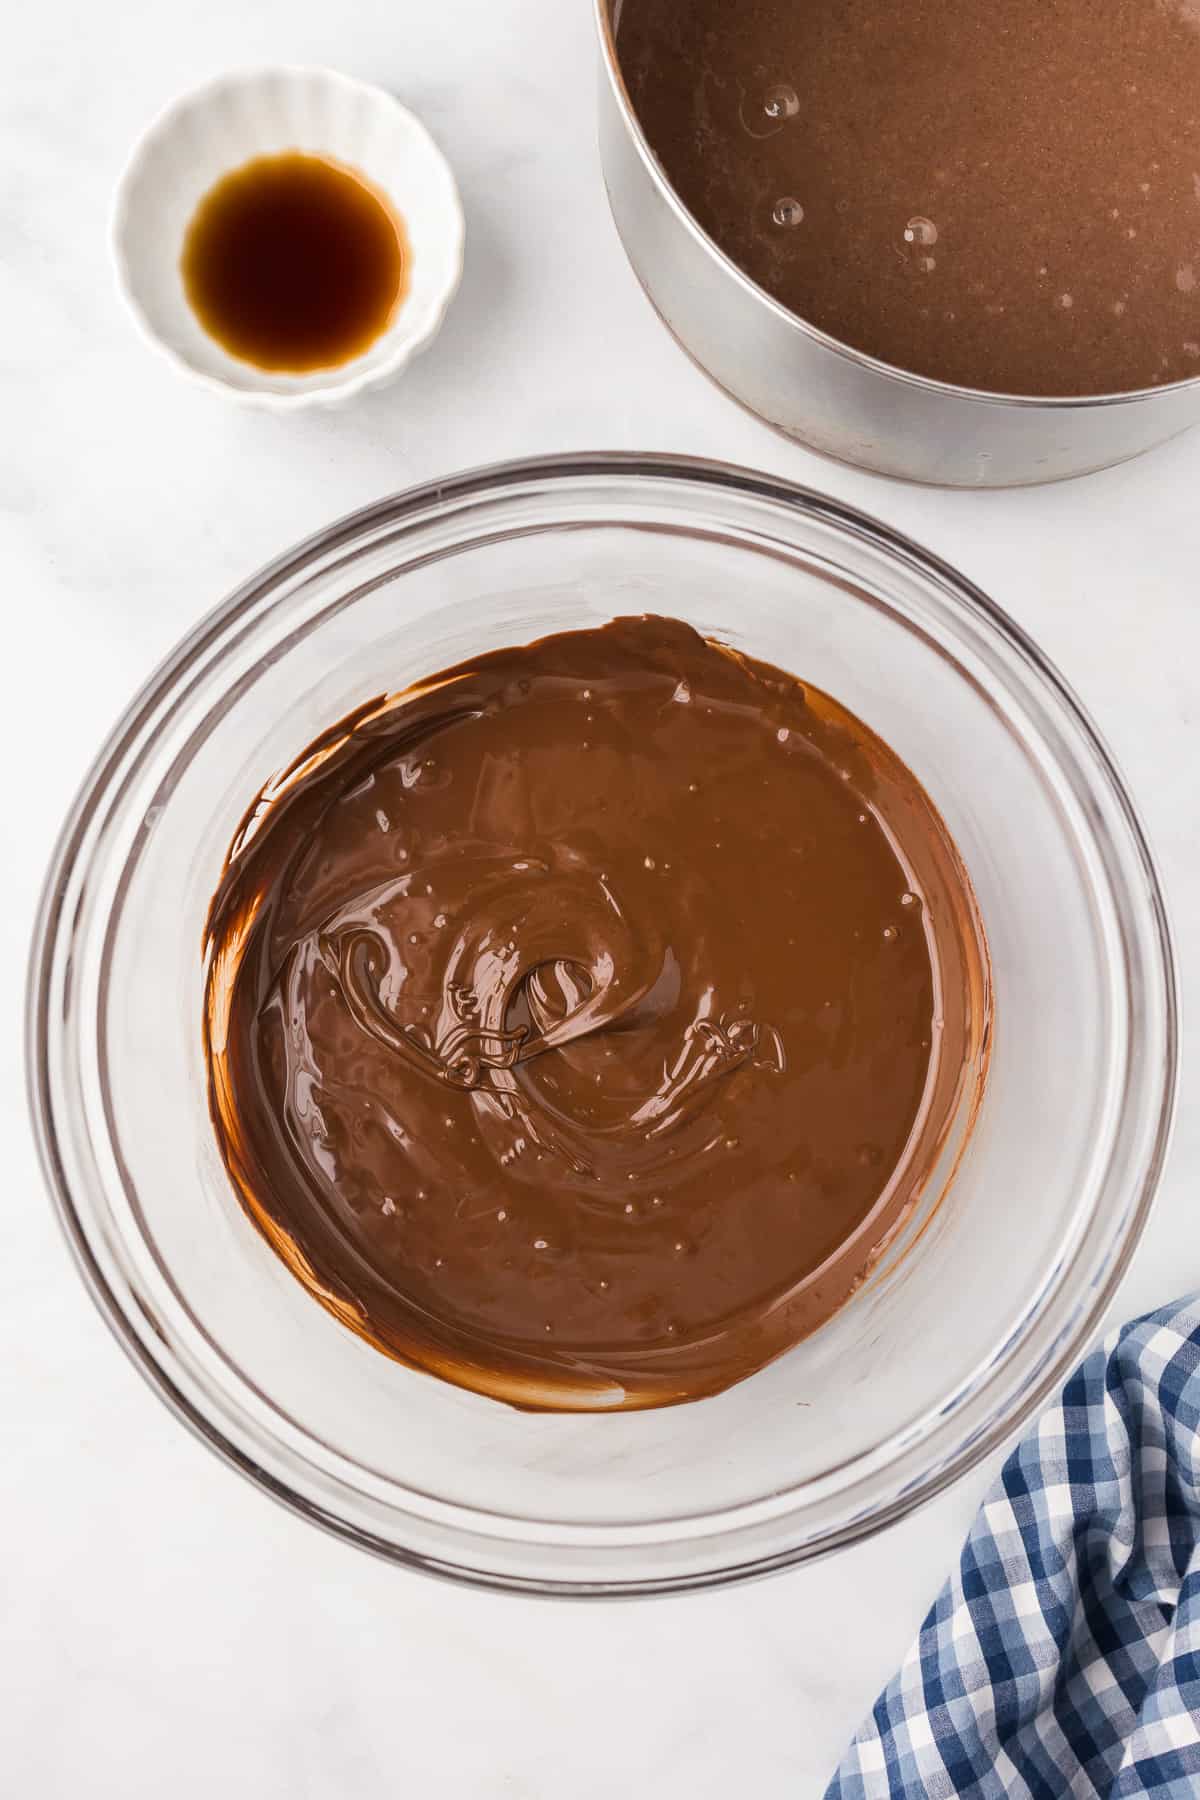 Melted chocolate in a large bowl from overhead with a small bowl of vanilla and a pot with chocolate inside nearby.